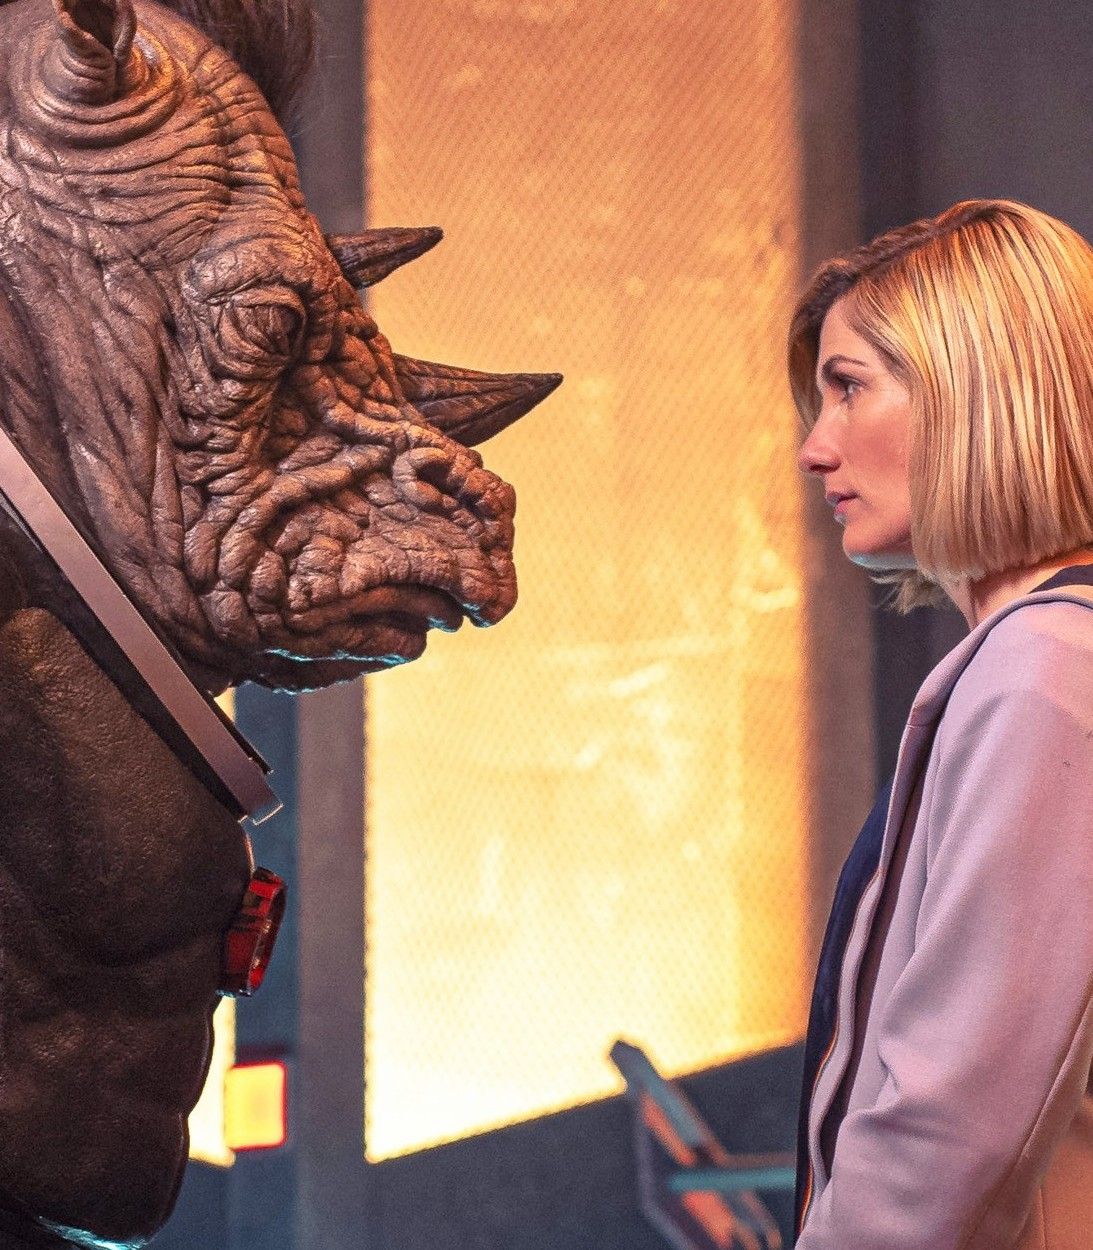 Jodie Whittaker as Thirteenth Doctor and Judoon in Doctor Who vertical